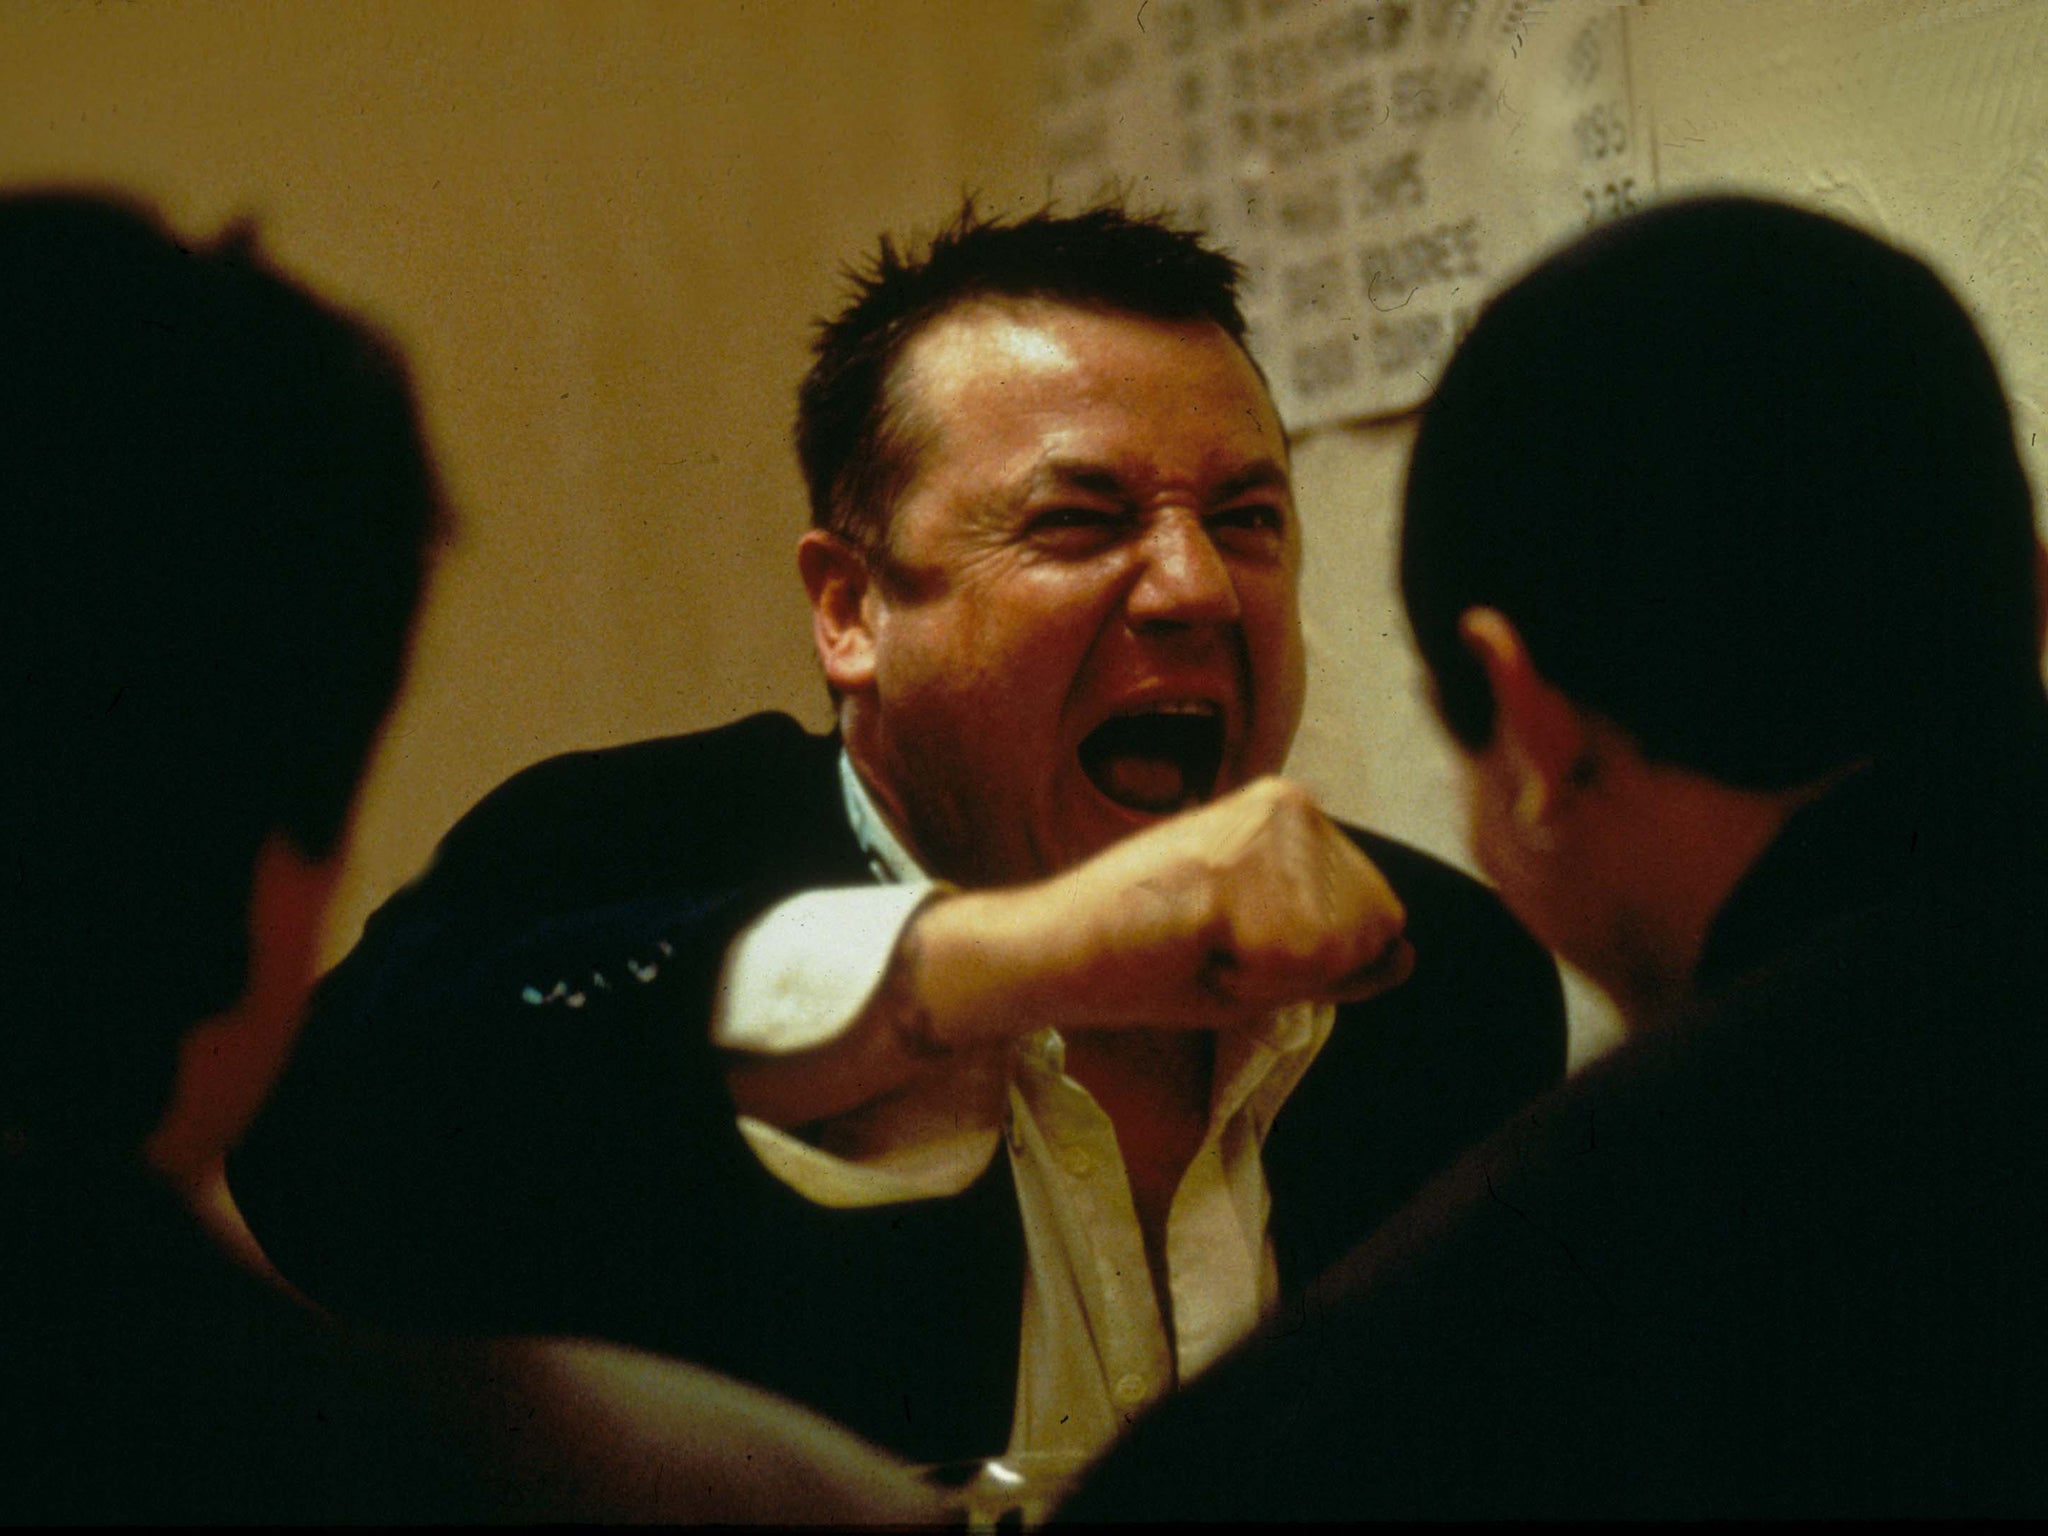 Ray Winstone in Gary Oldman’s ‘Nil by Mouth'